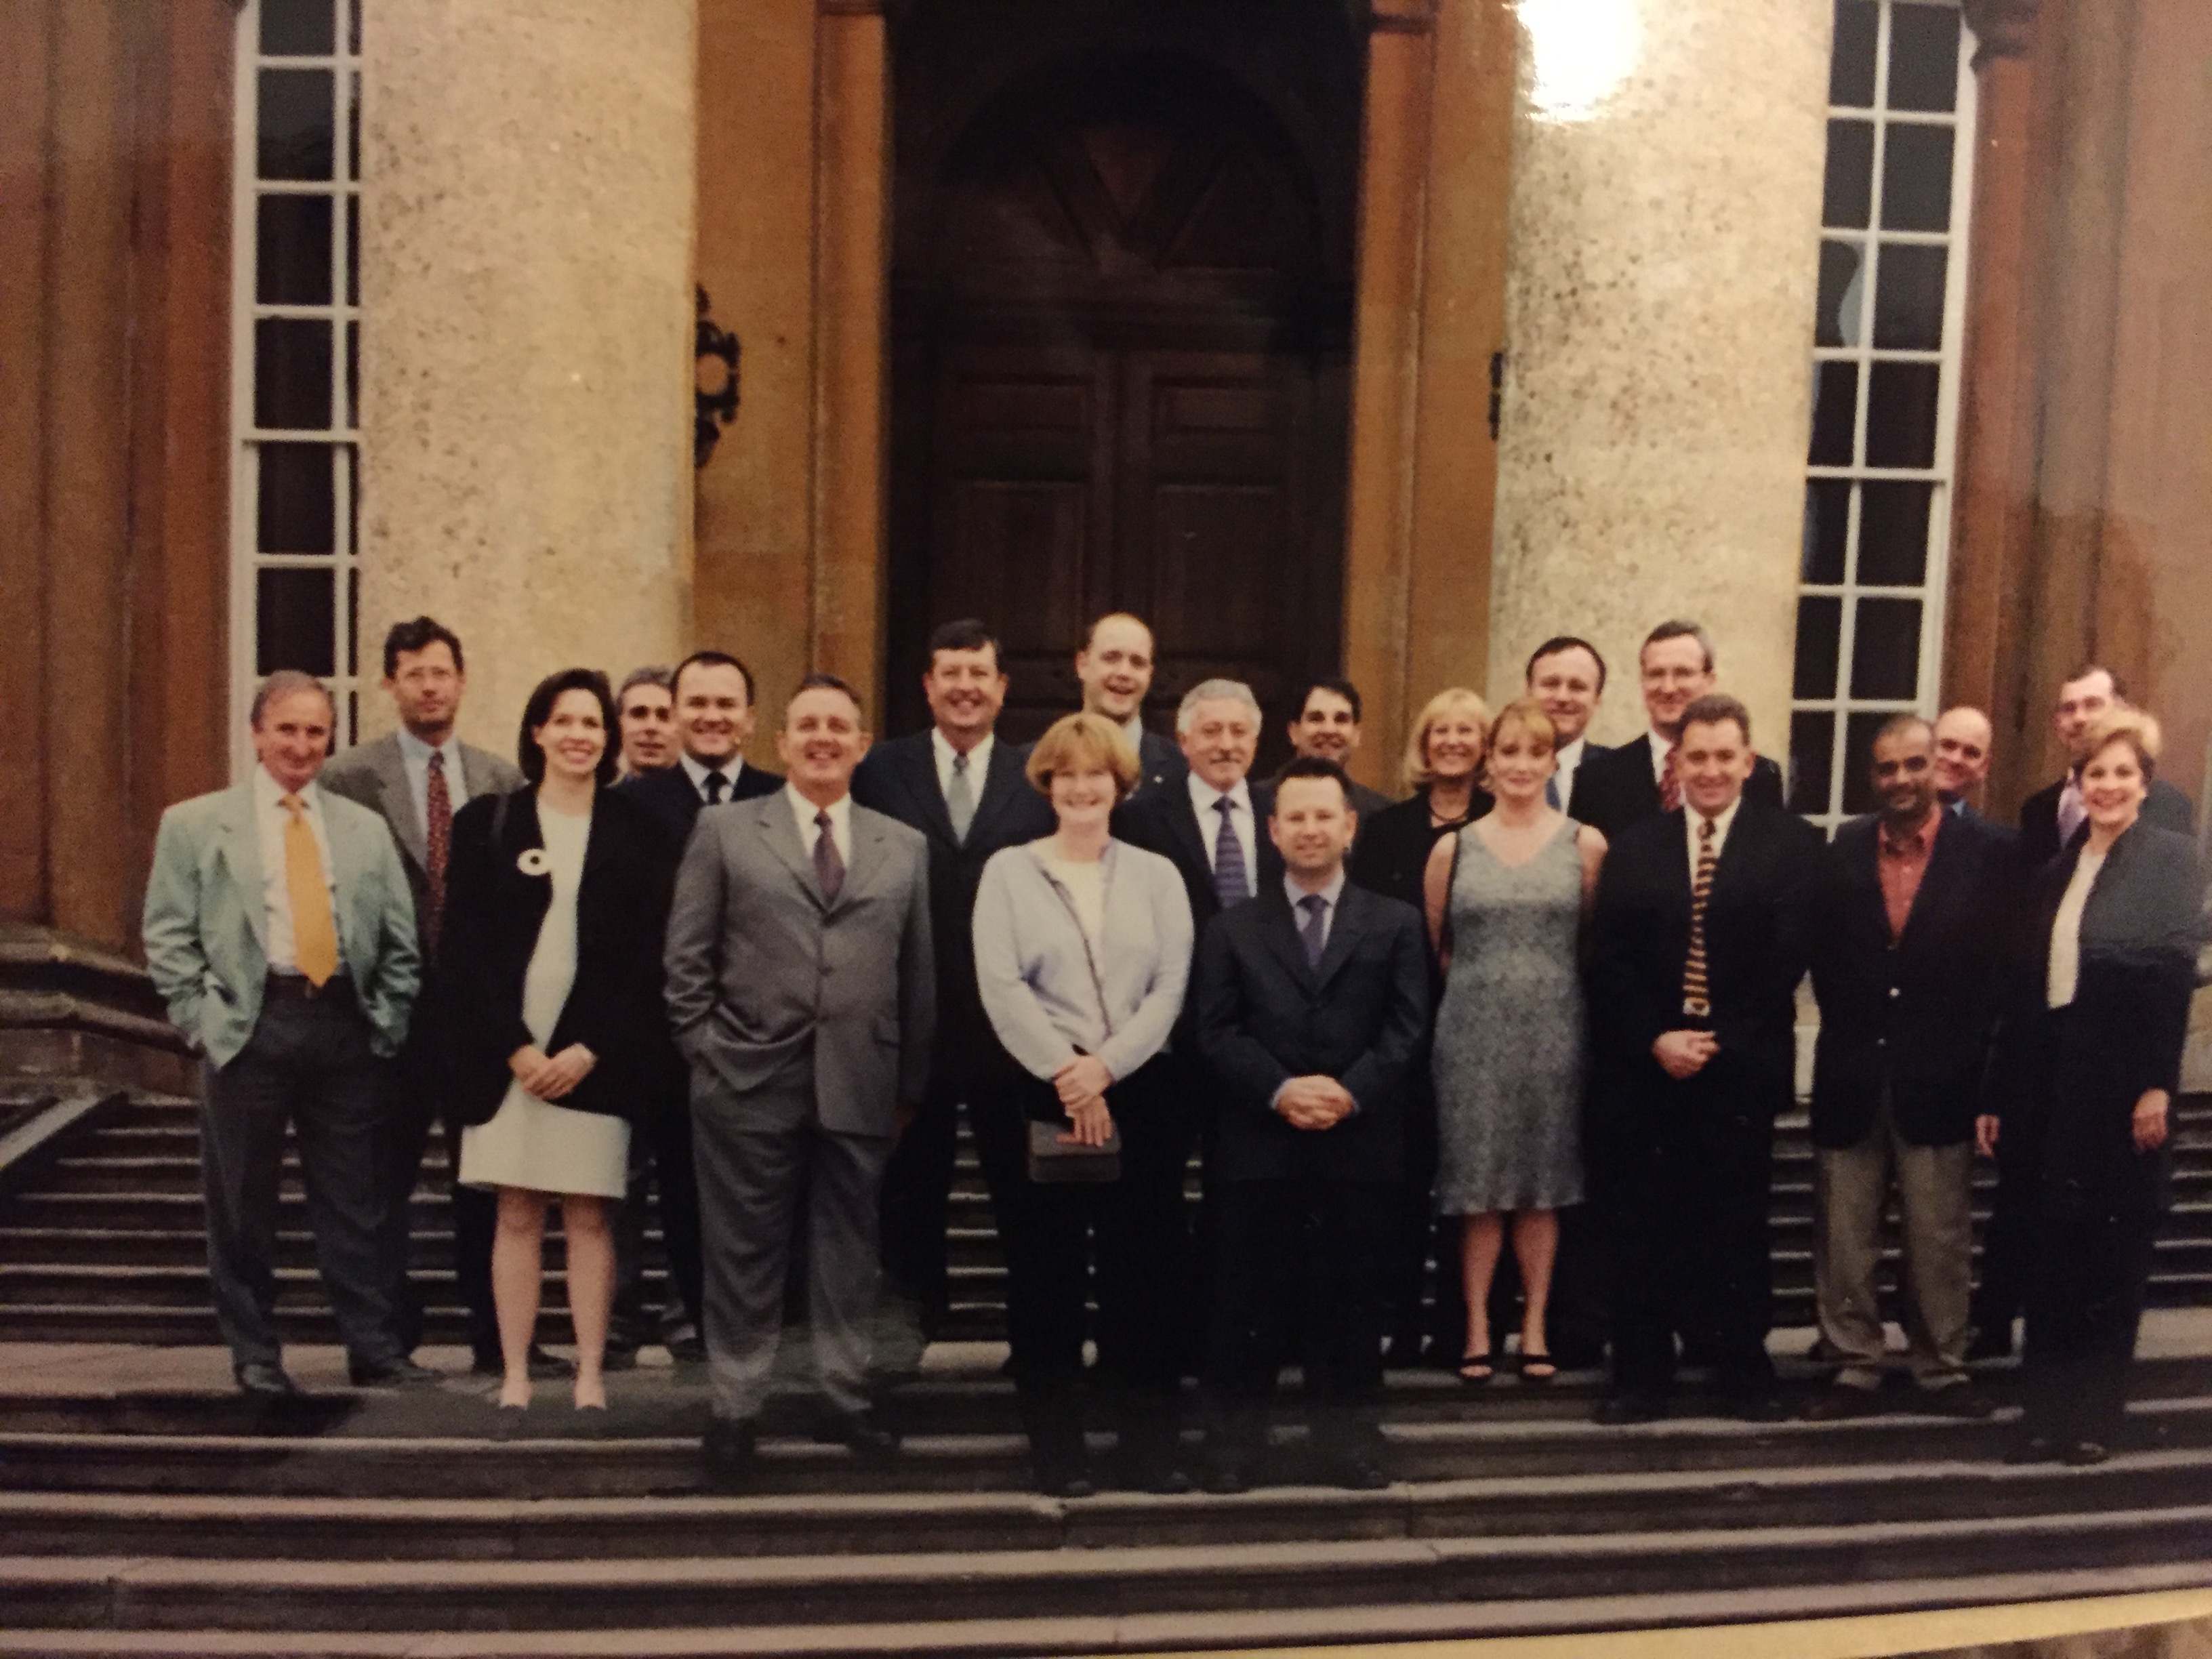 Above: Amanda (third left) outside Blenheim Palace during her Hallmark days in 2001 with colleagues and customers.